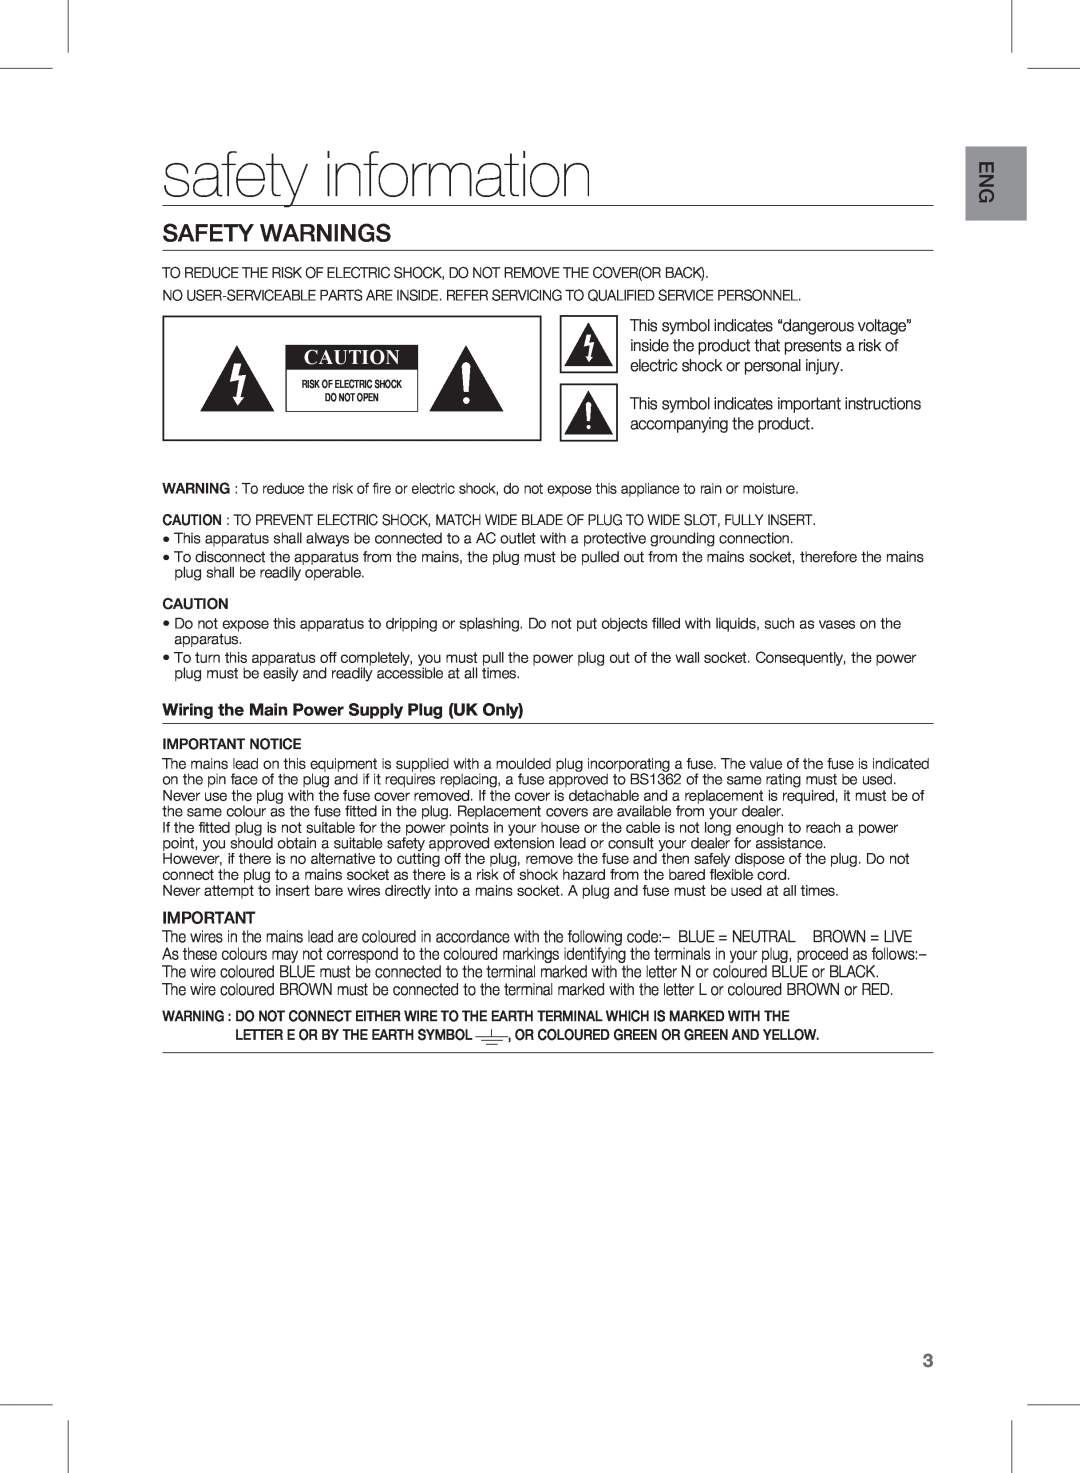 Samsung HW-E450 user manual safety information, Safety Warnings, Wiring the Main Power Supply Plug UK Only 